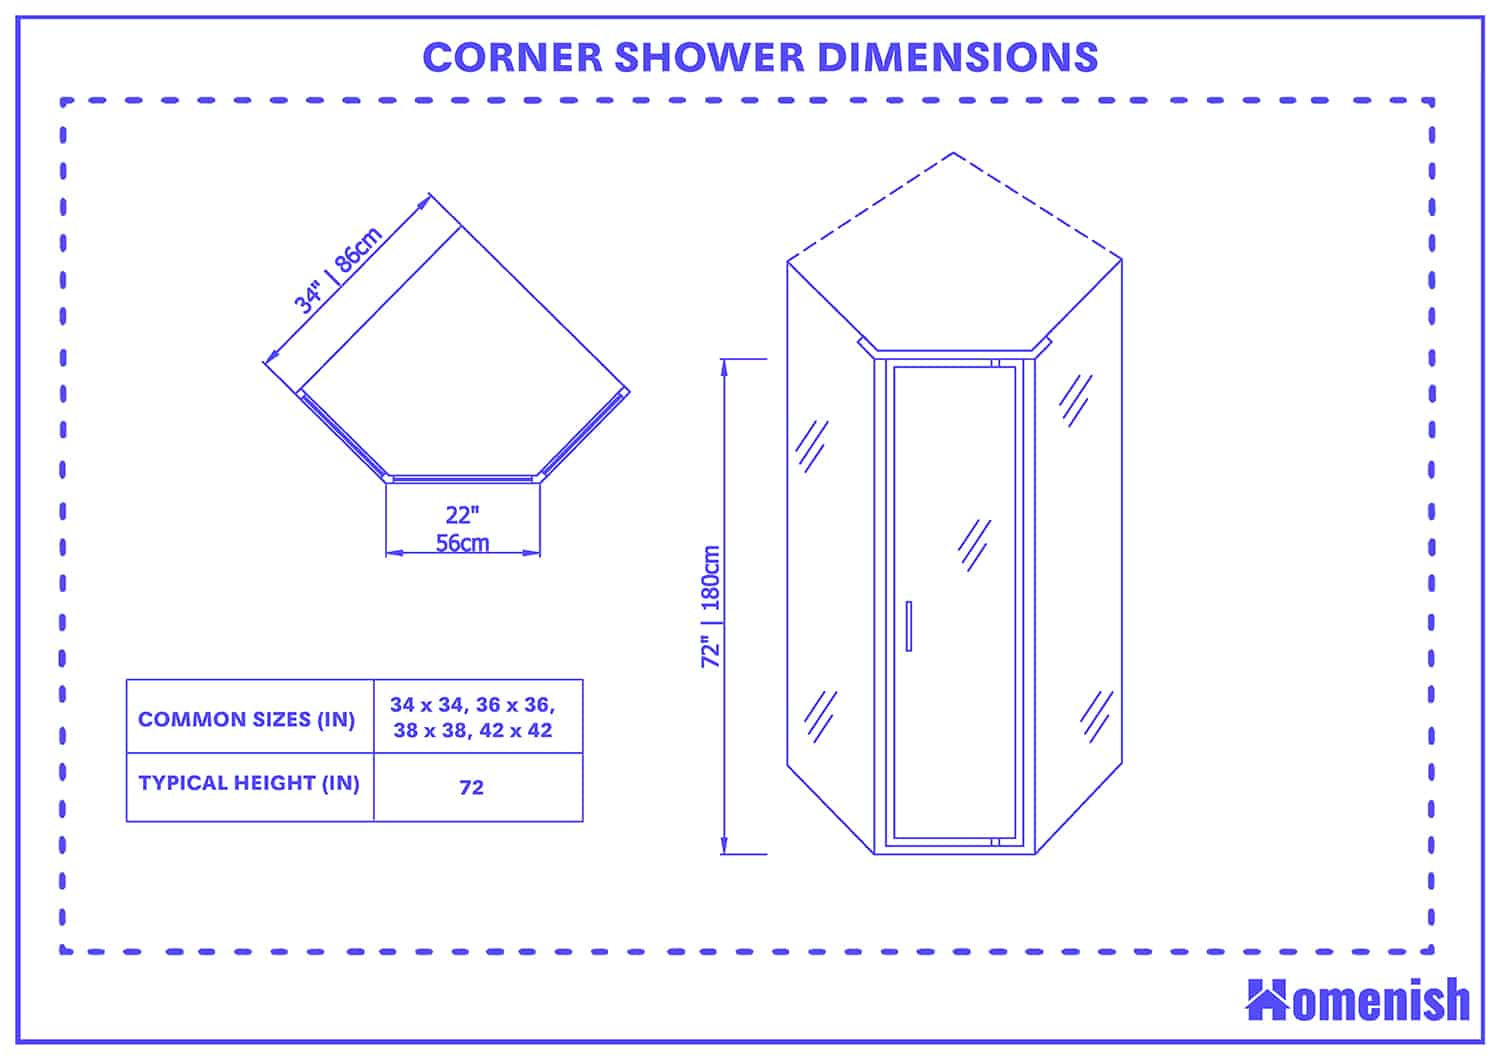 Typical Corner shower dimensions